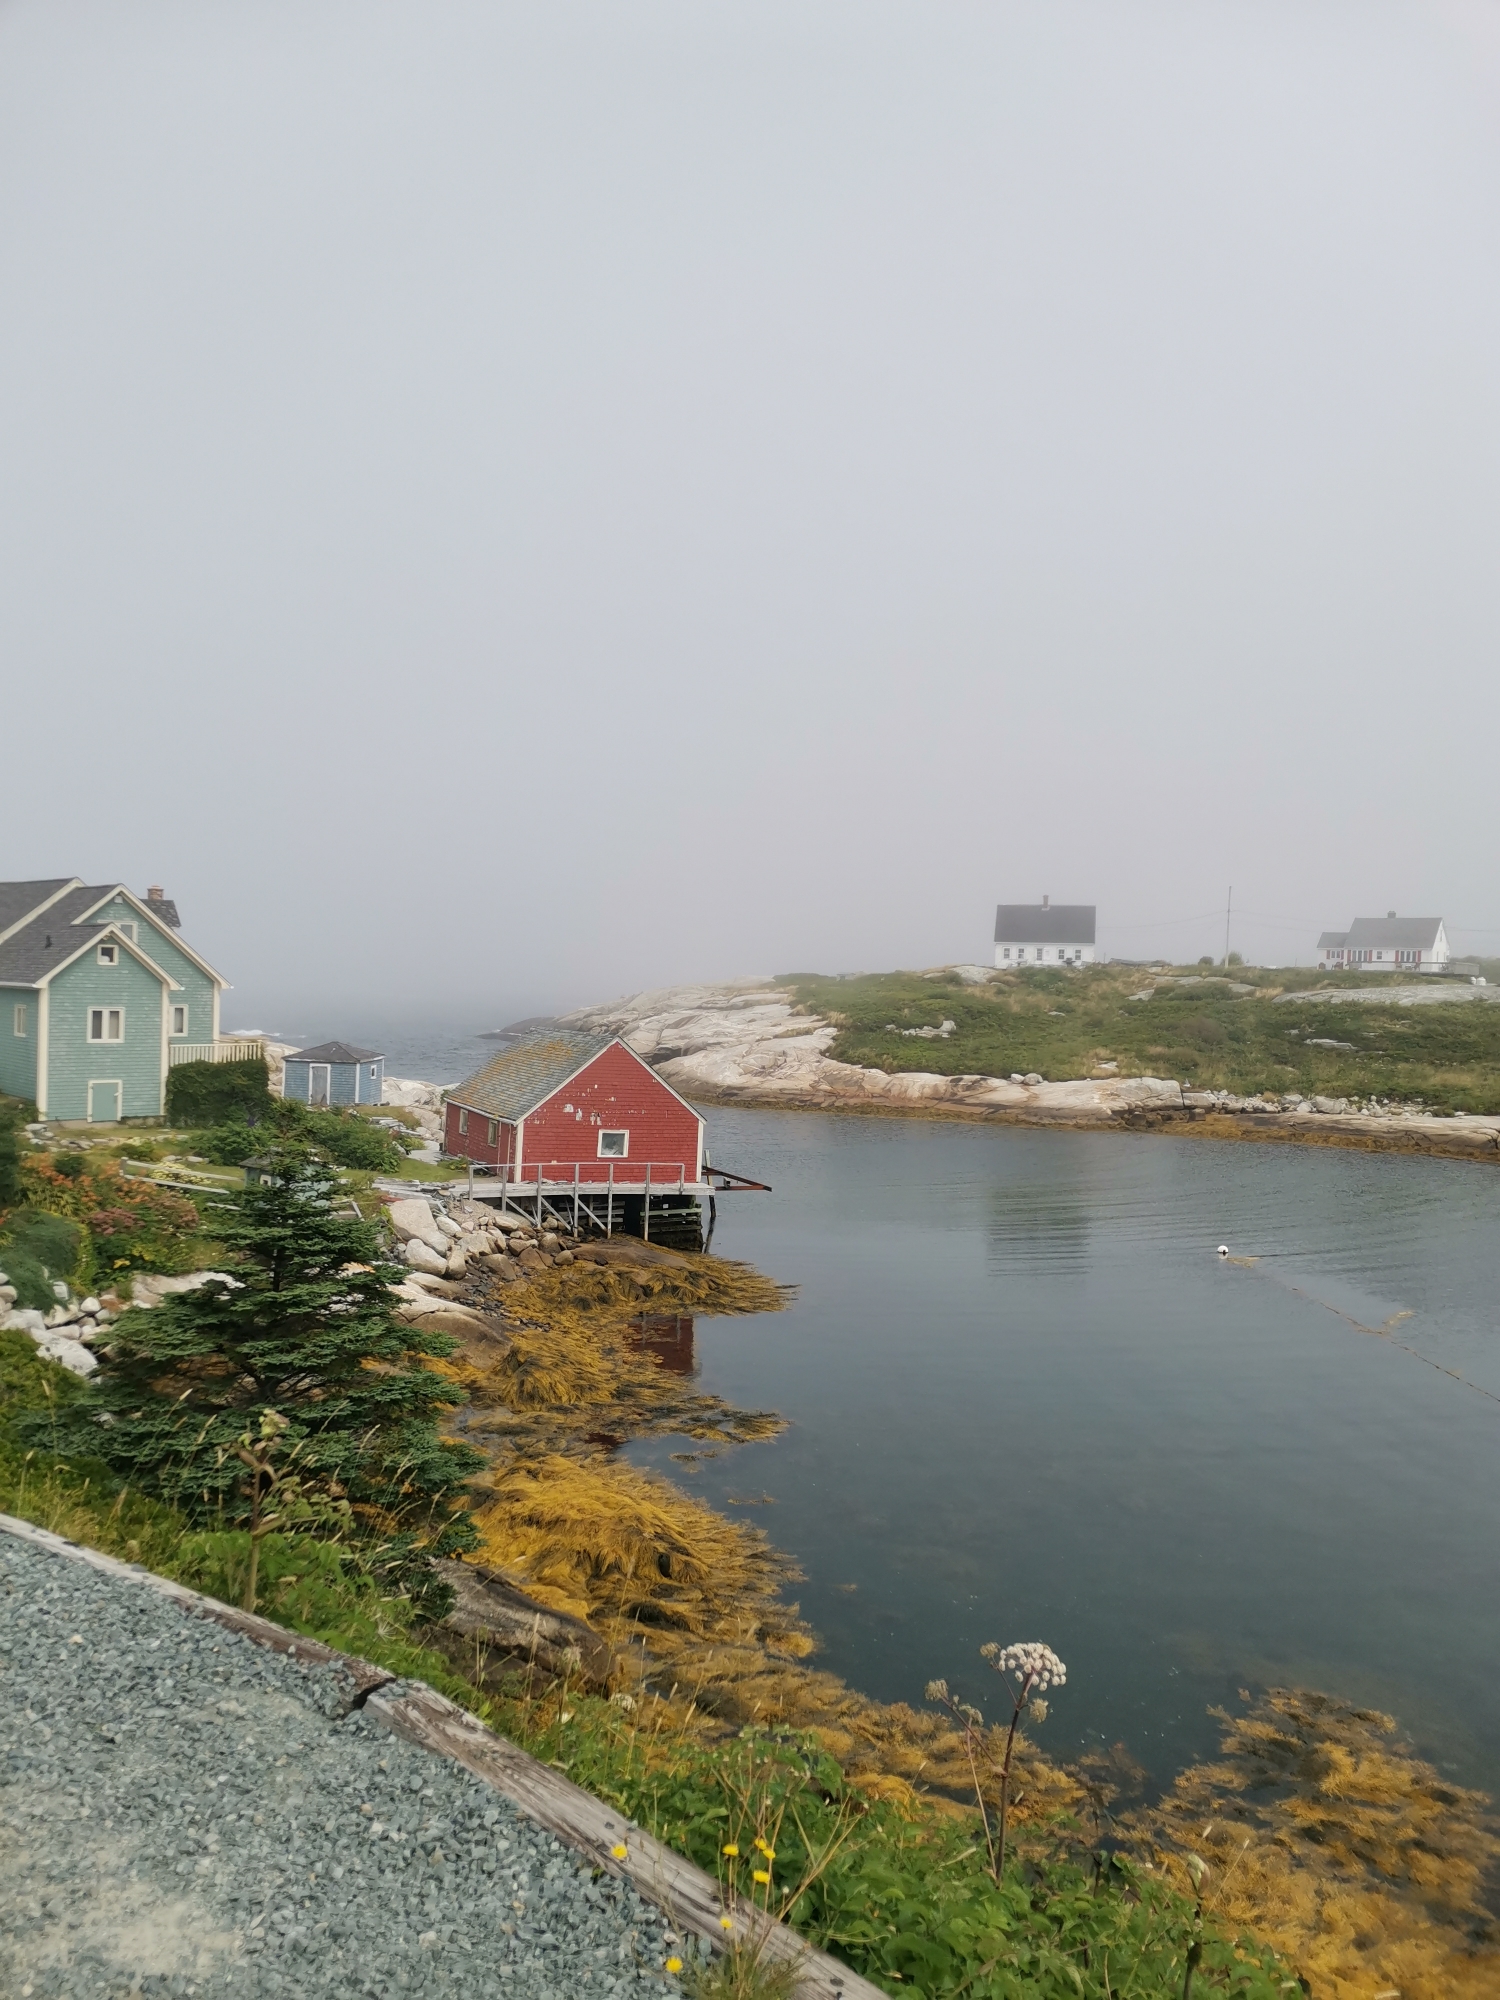 Village in Peggys cove houses and water